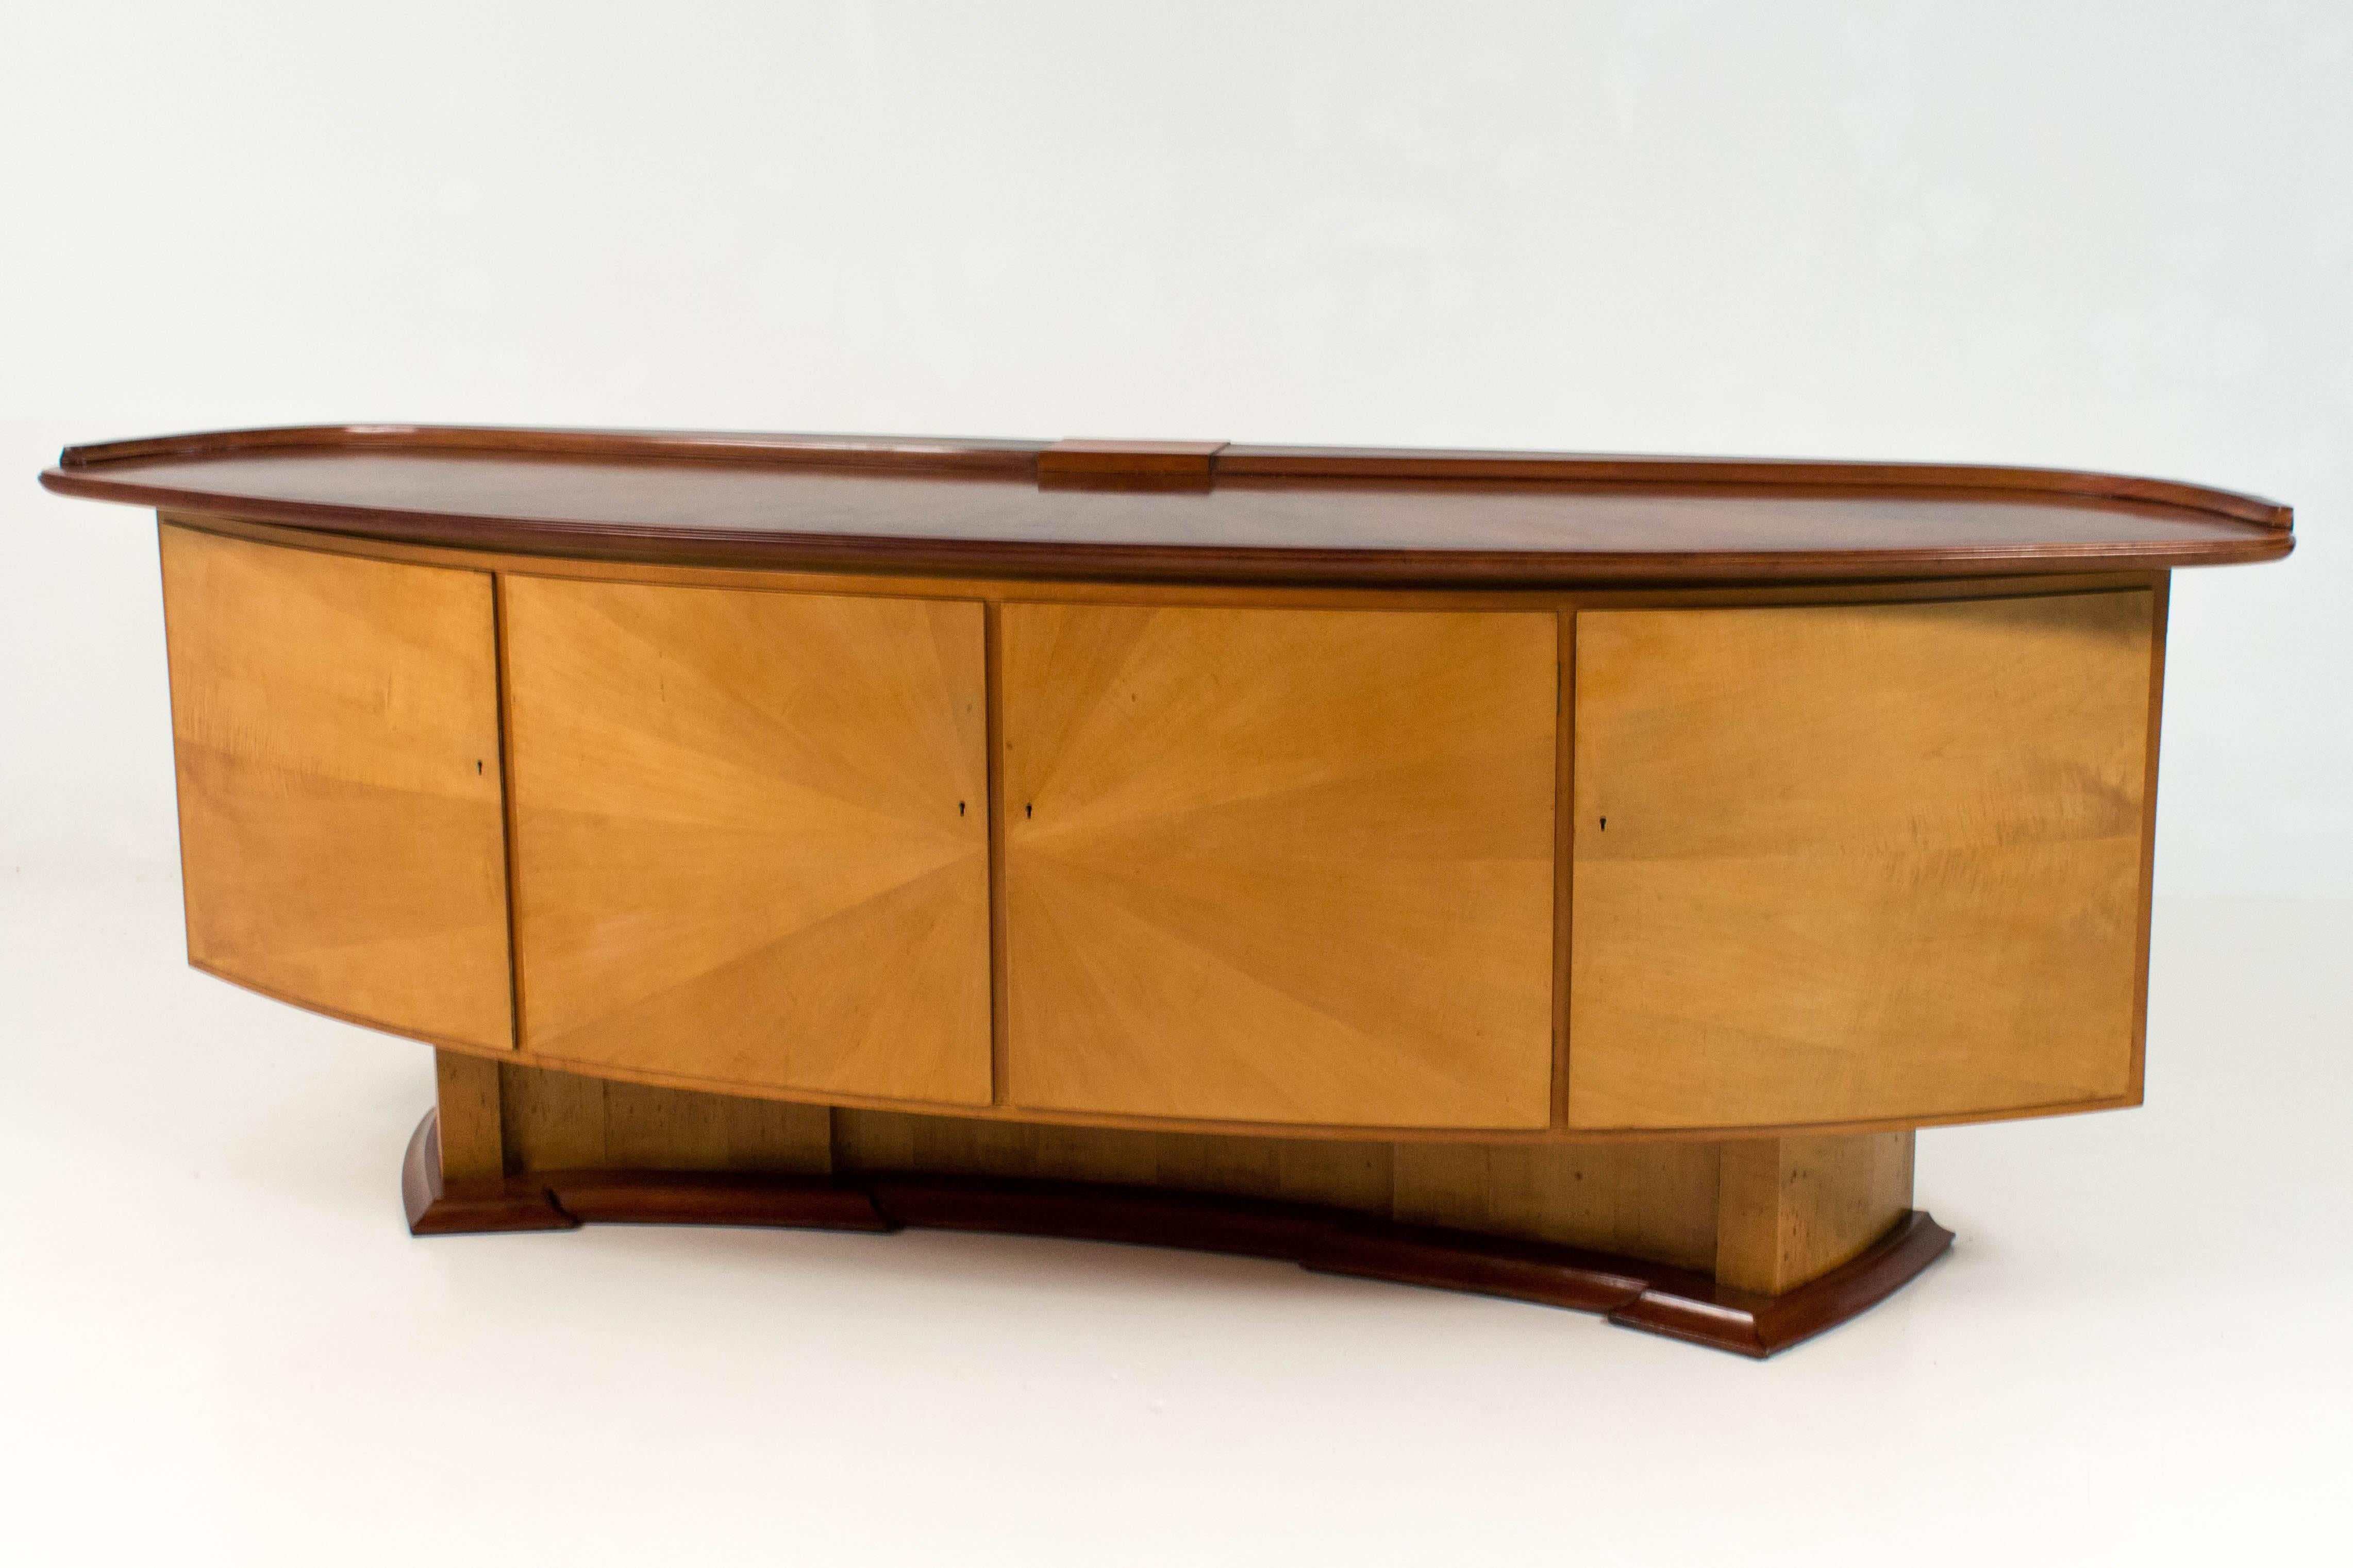 Rare and important Art Deco sideboard or credenza by Gebroeders Reens, 1930s.
Sycamore maple with satinwood veneered top.
Fabulous design with integrated bar.
In very good condition with minor wear consistent with age and use,
preserving a